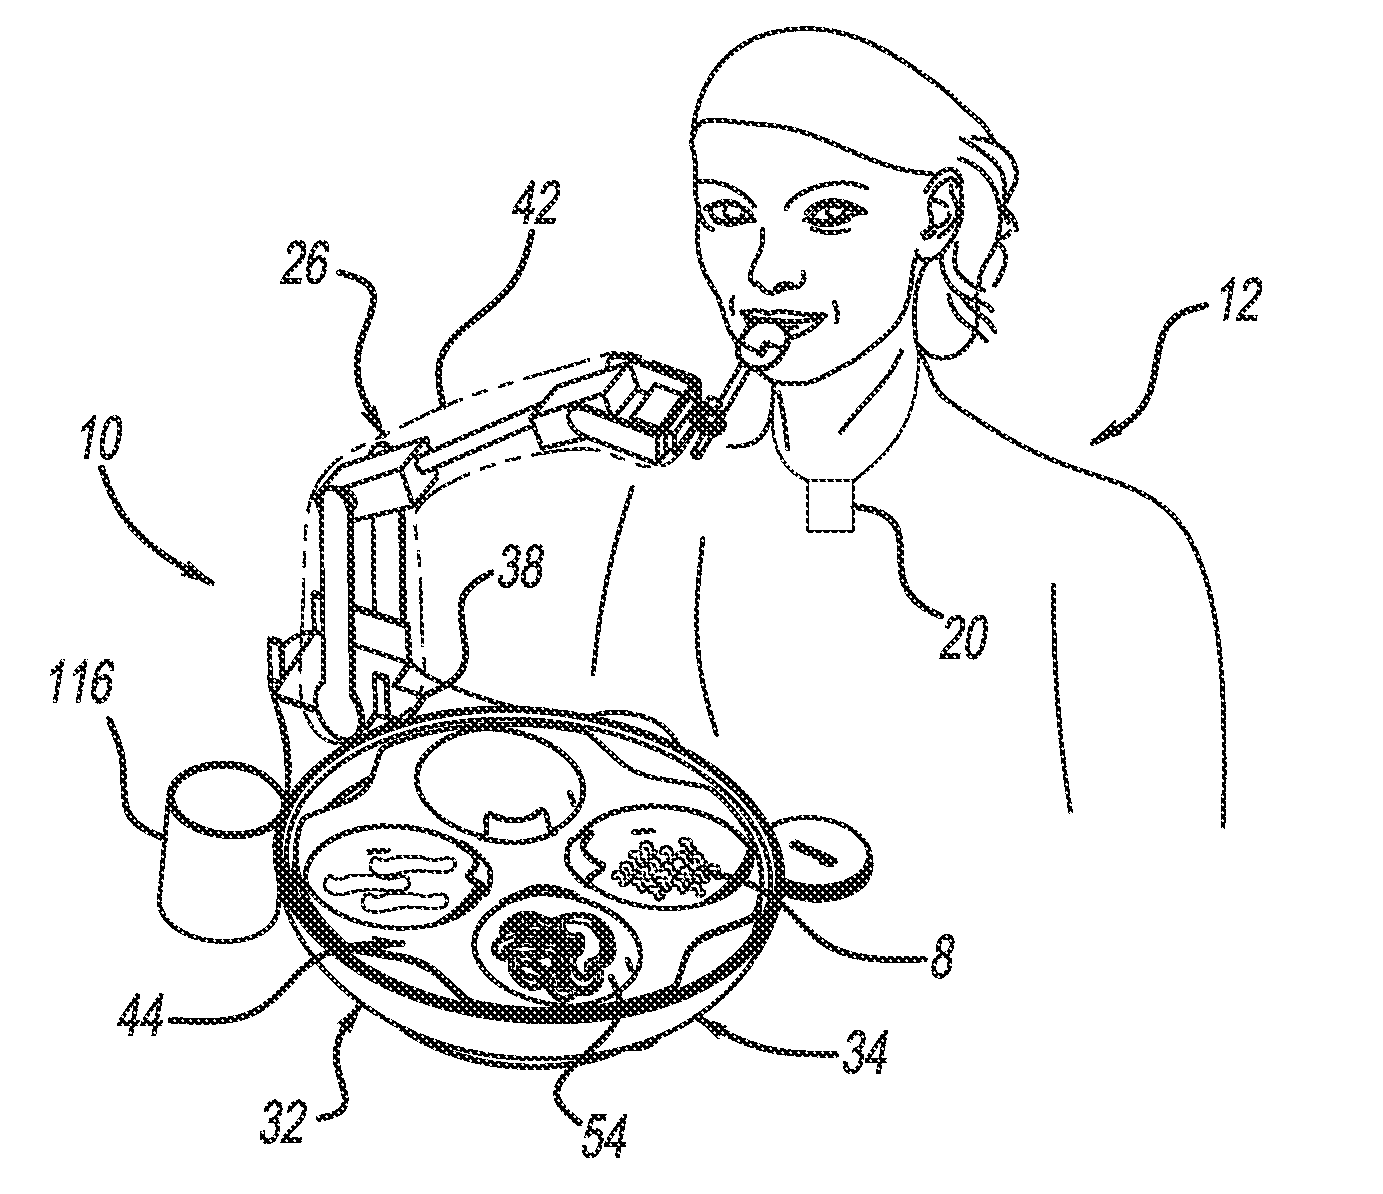 Self-feeding device for an individual